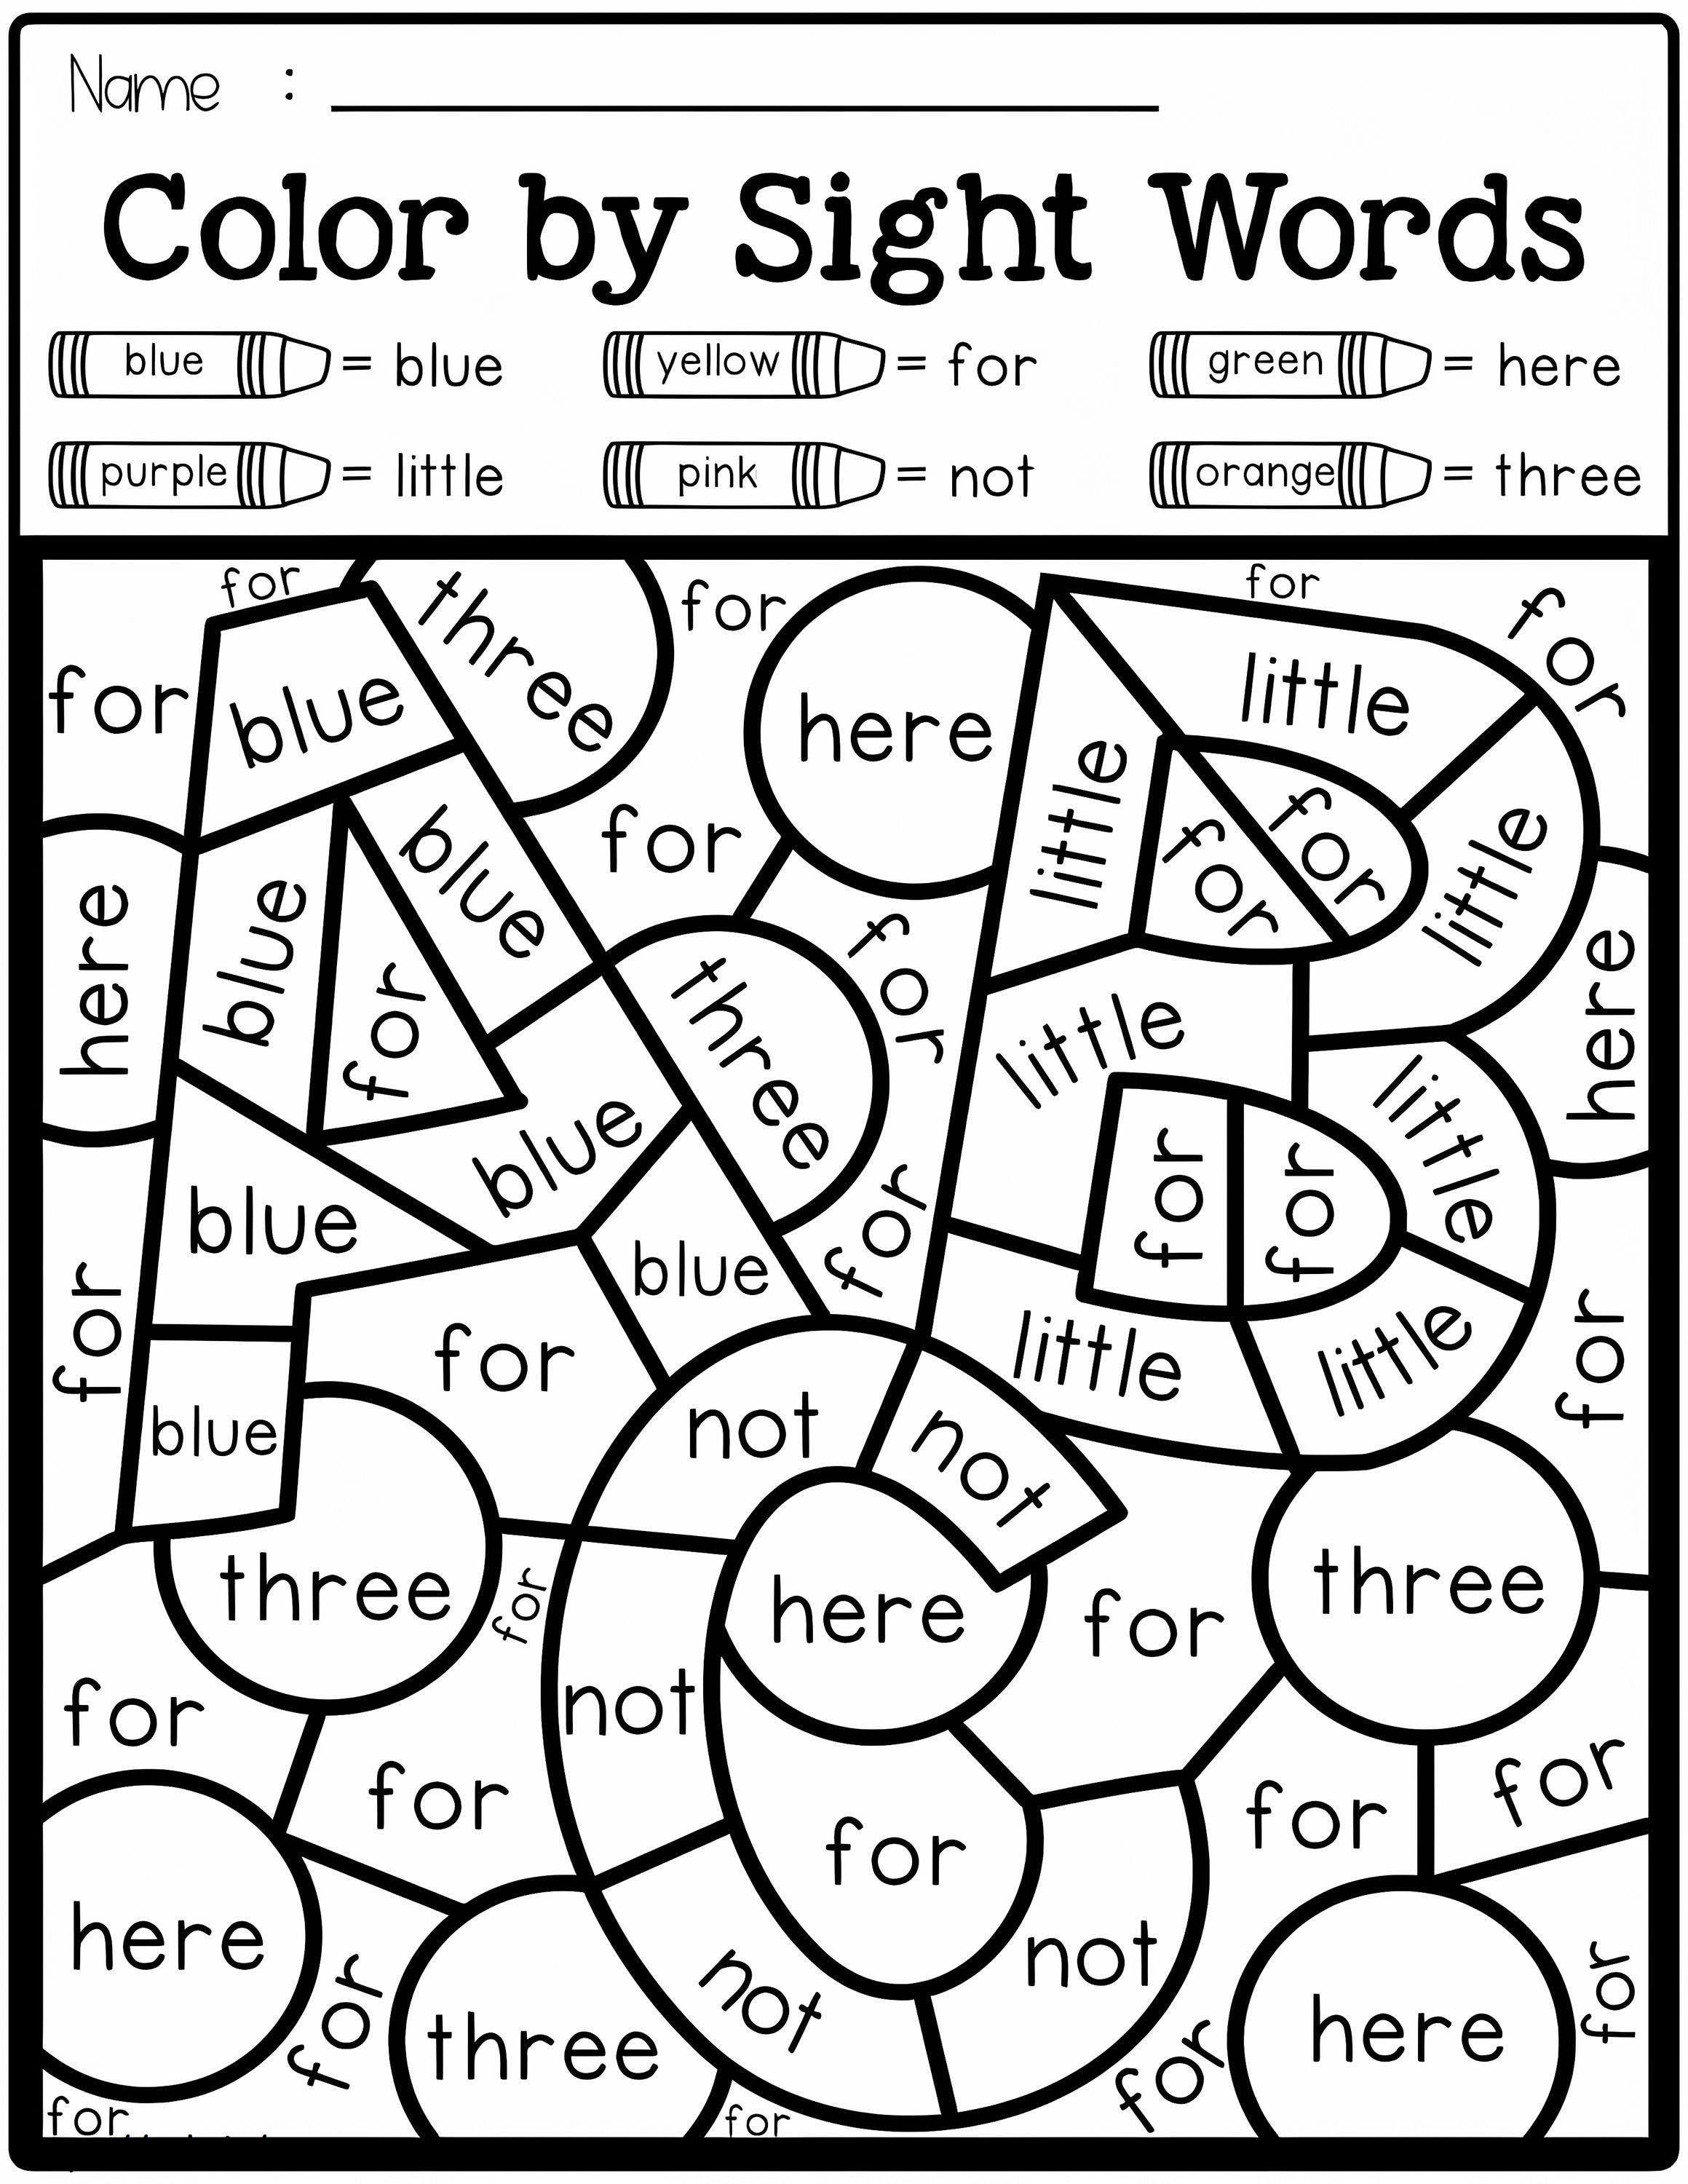 ABC Sight Words coloring page